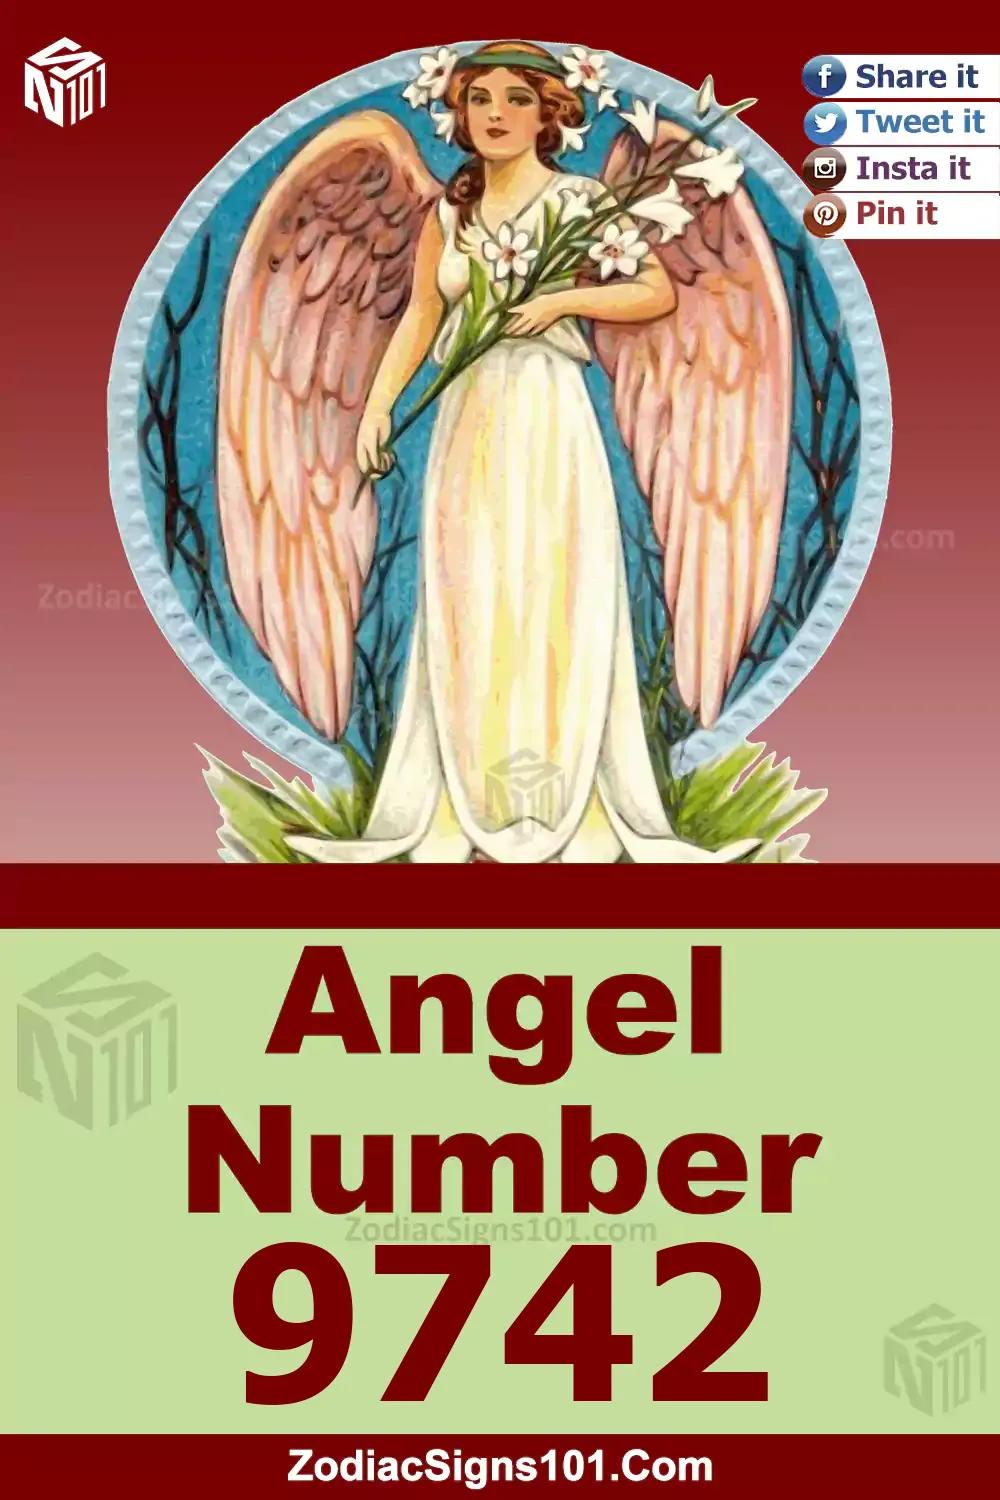 9742 Angel Number Meaning